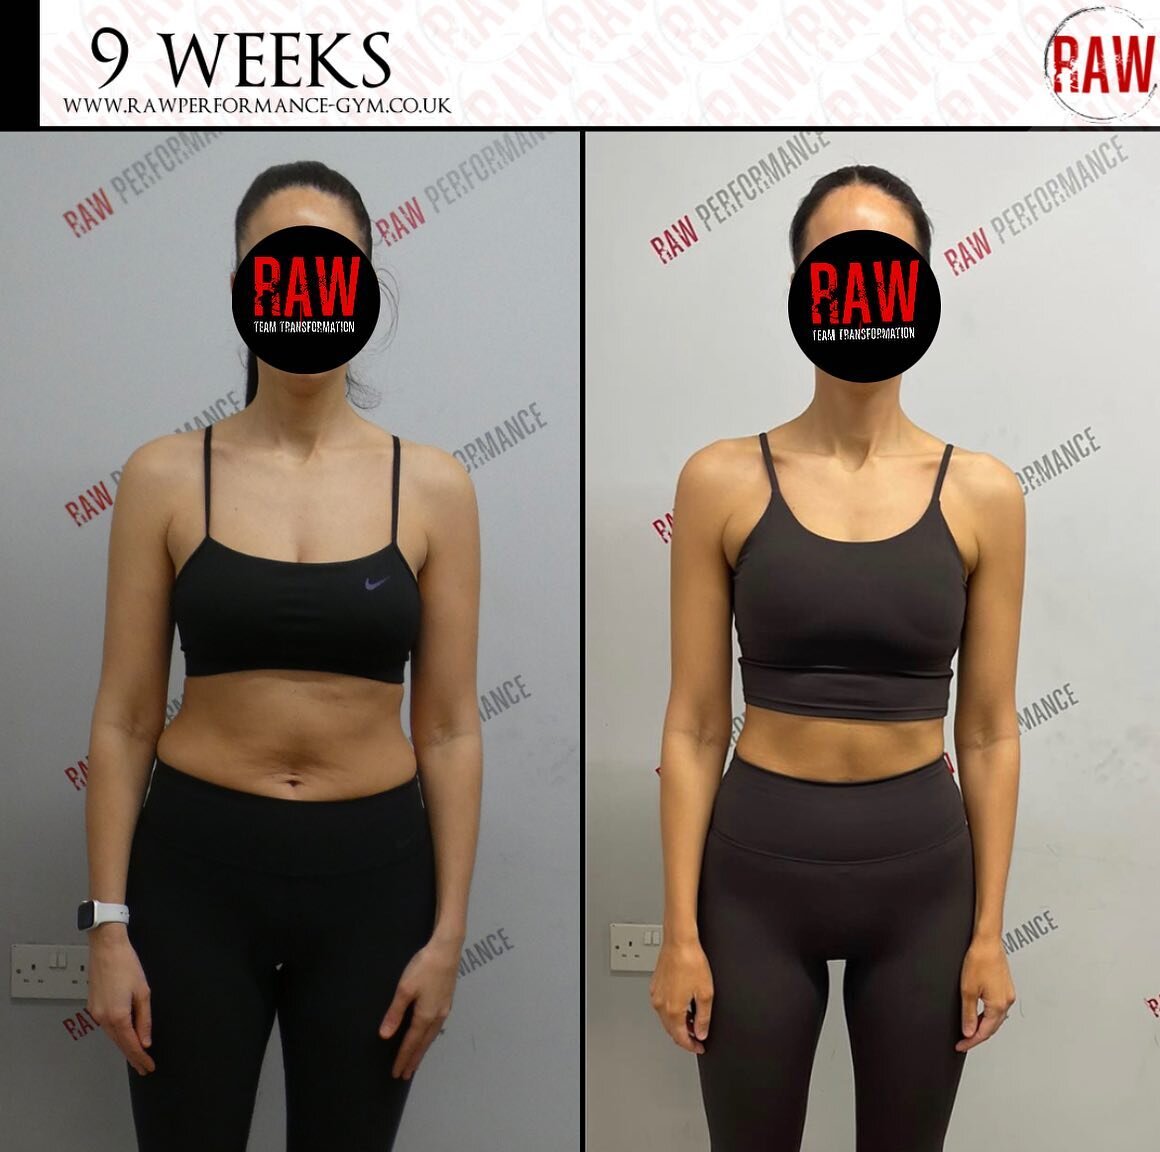 *** Loren ***

This is what you wanted!
*
New mum of 1 @lorengarwood produced these fantastic results on our latest Team Transformation program under the watchful guidance of @bpstrengthcoach_ &amp; @jonterrypt 
*
Loren was relentless in her training